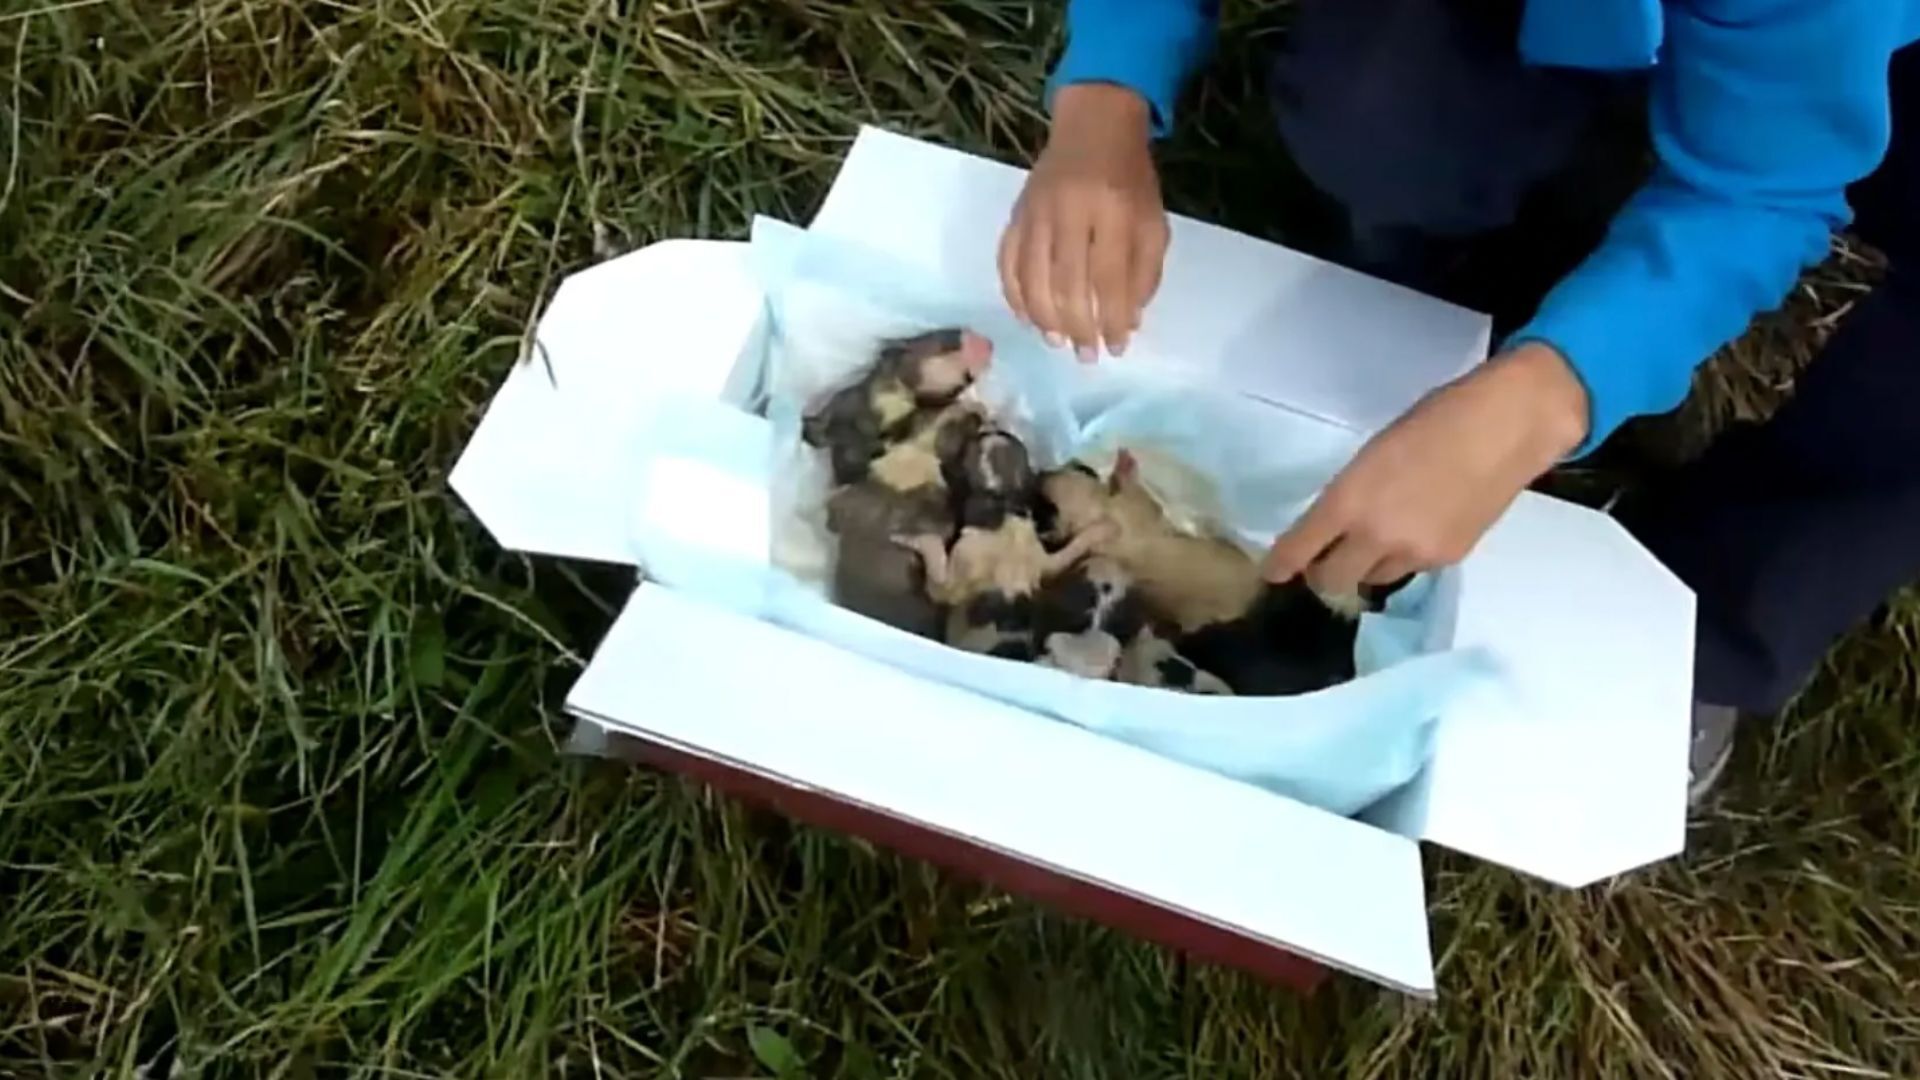 Rescuers Found A Mysterious Box In The Bushes And Were Surprised By What They Found In It